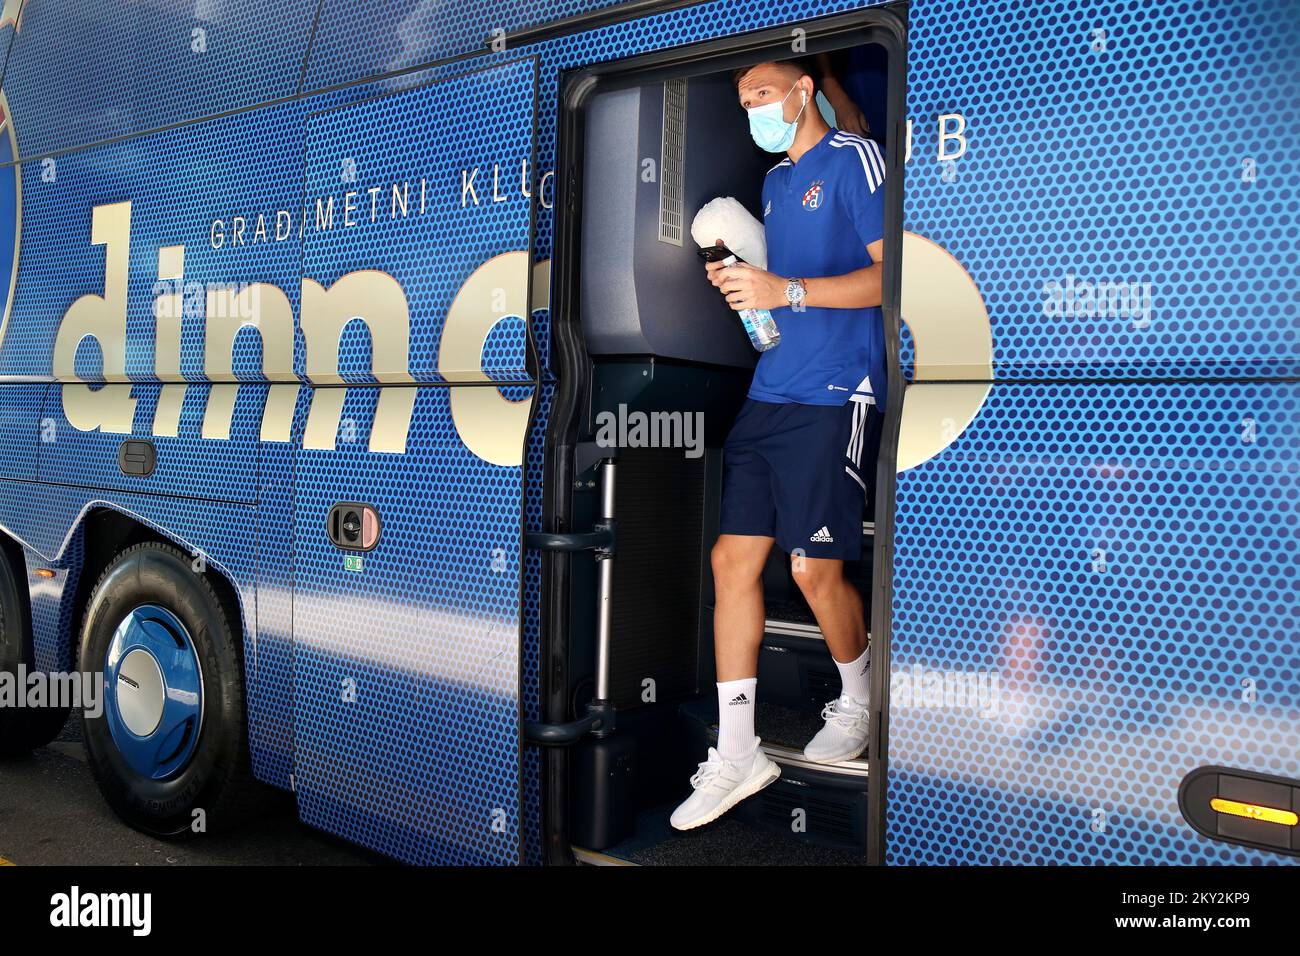 GNK Dinamo football player Daniel Stefulj can be seen at the Franjo Tudjman airport in Zagreb, Croatia on July 25, 2022. The departure of GNK Dinamo footballers to Skopje before the match against FC Shkupi 1927 in the 2nd preliminary round of the UEFA Champions League. Photo: Luka Stanzl/PIXSELL Stock Photo